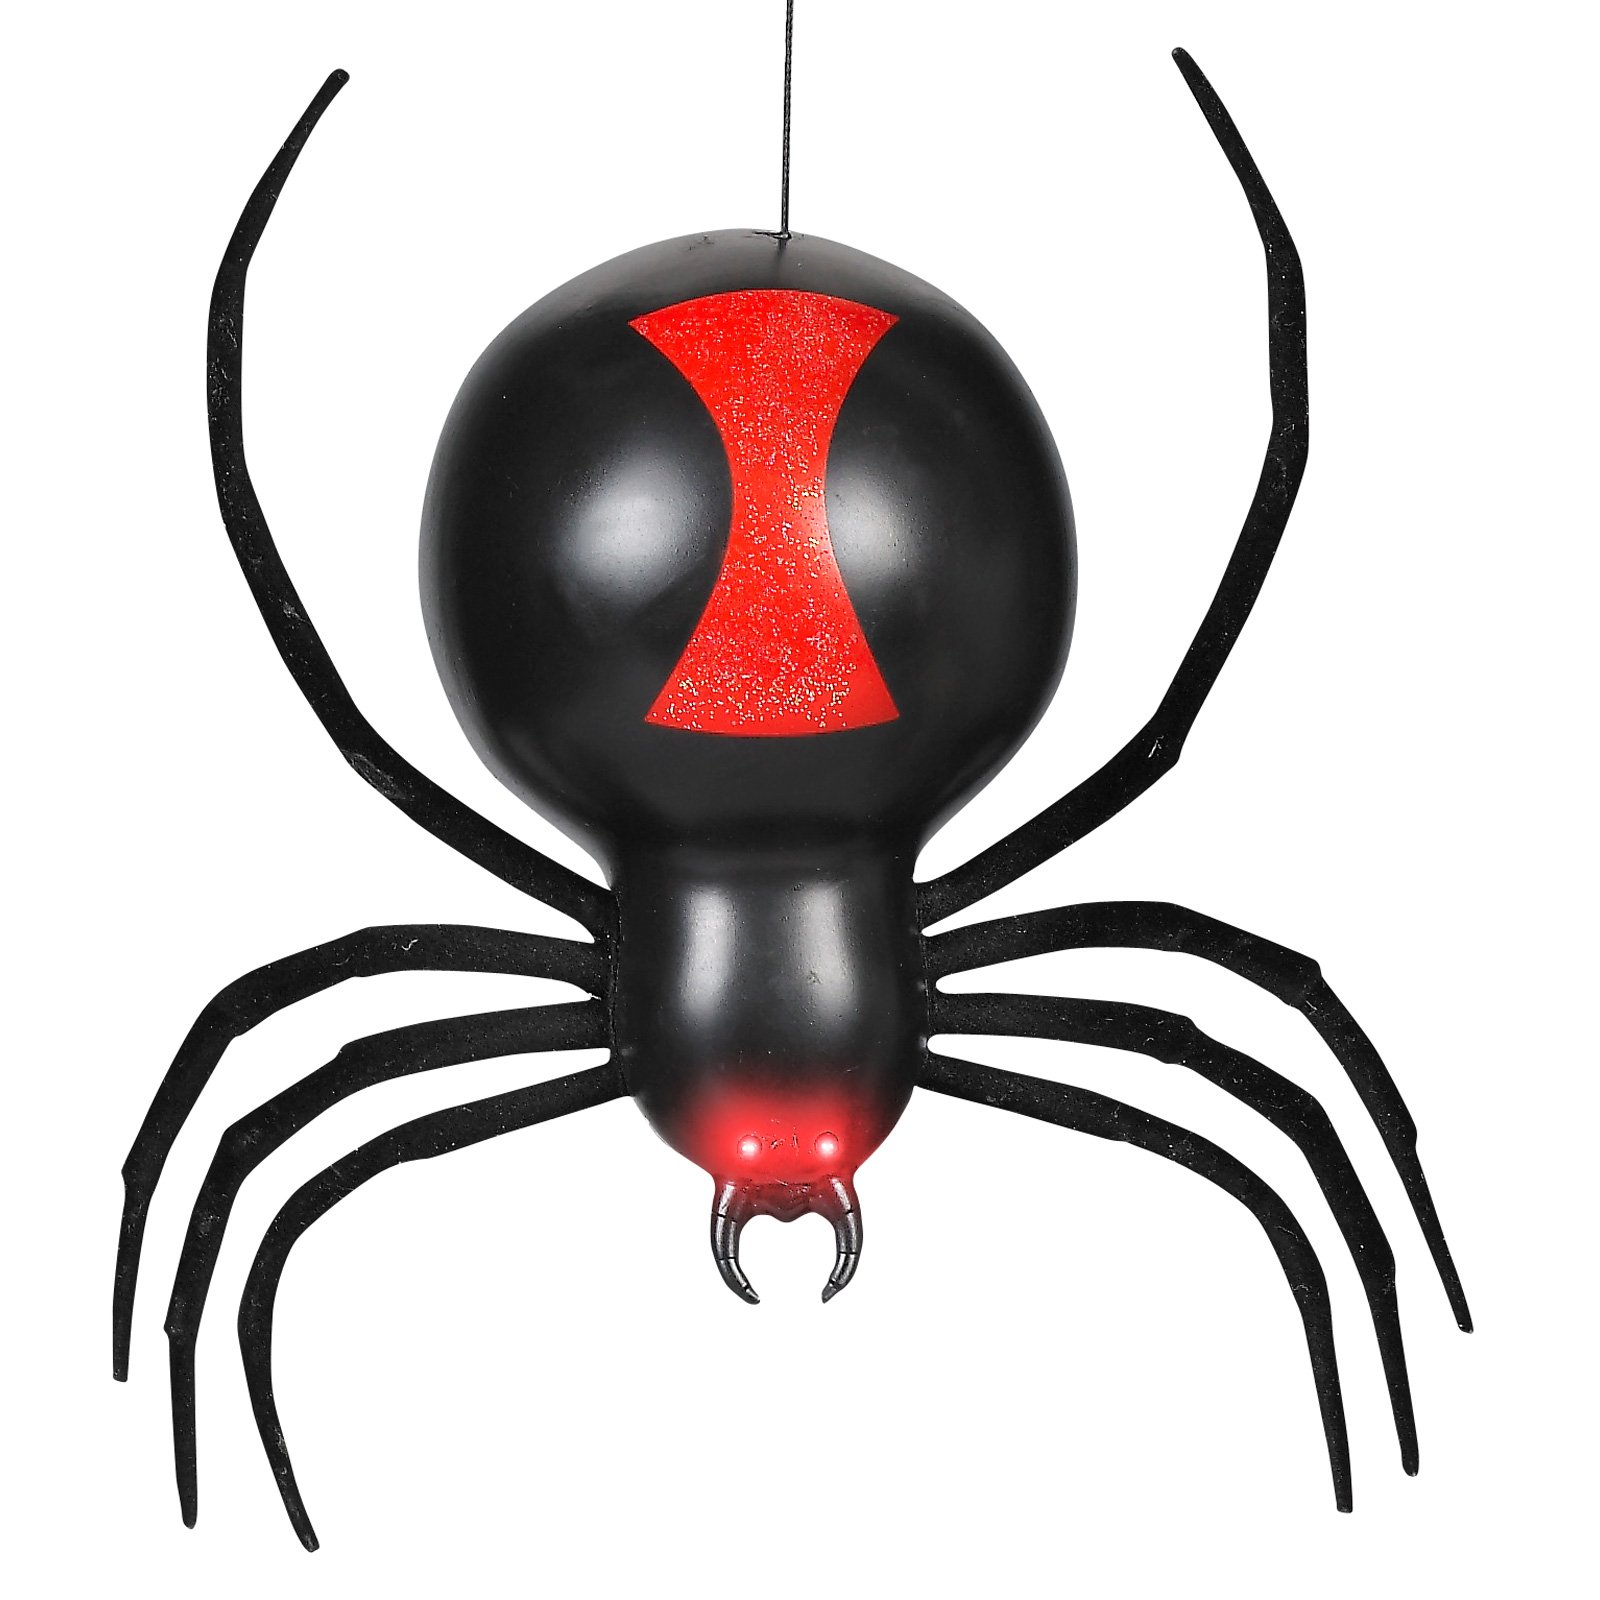 Black Widow Spider Eyes Images  Pictures - Becuo